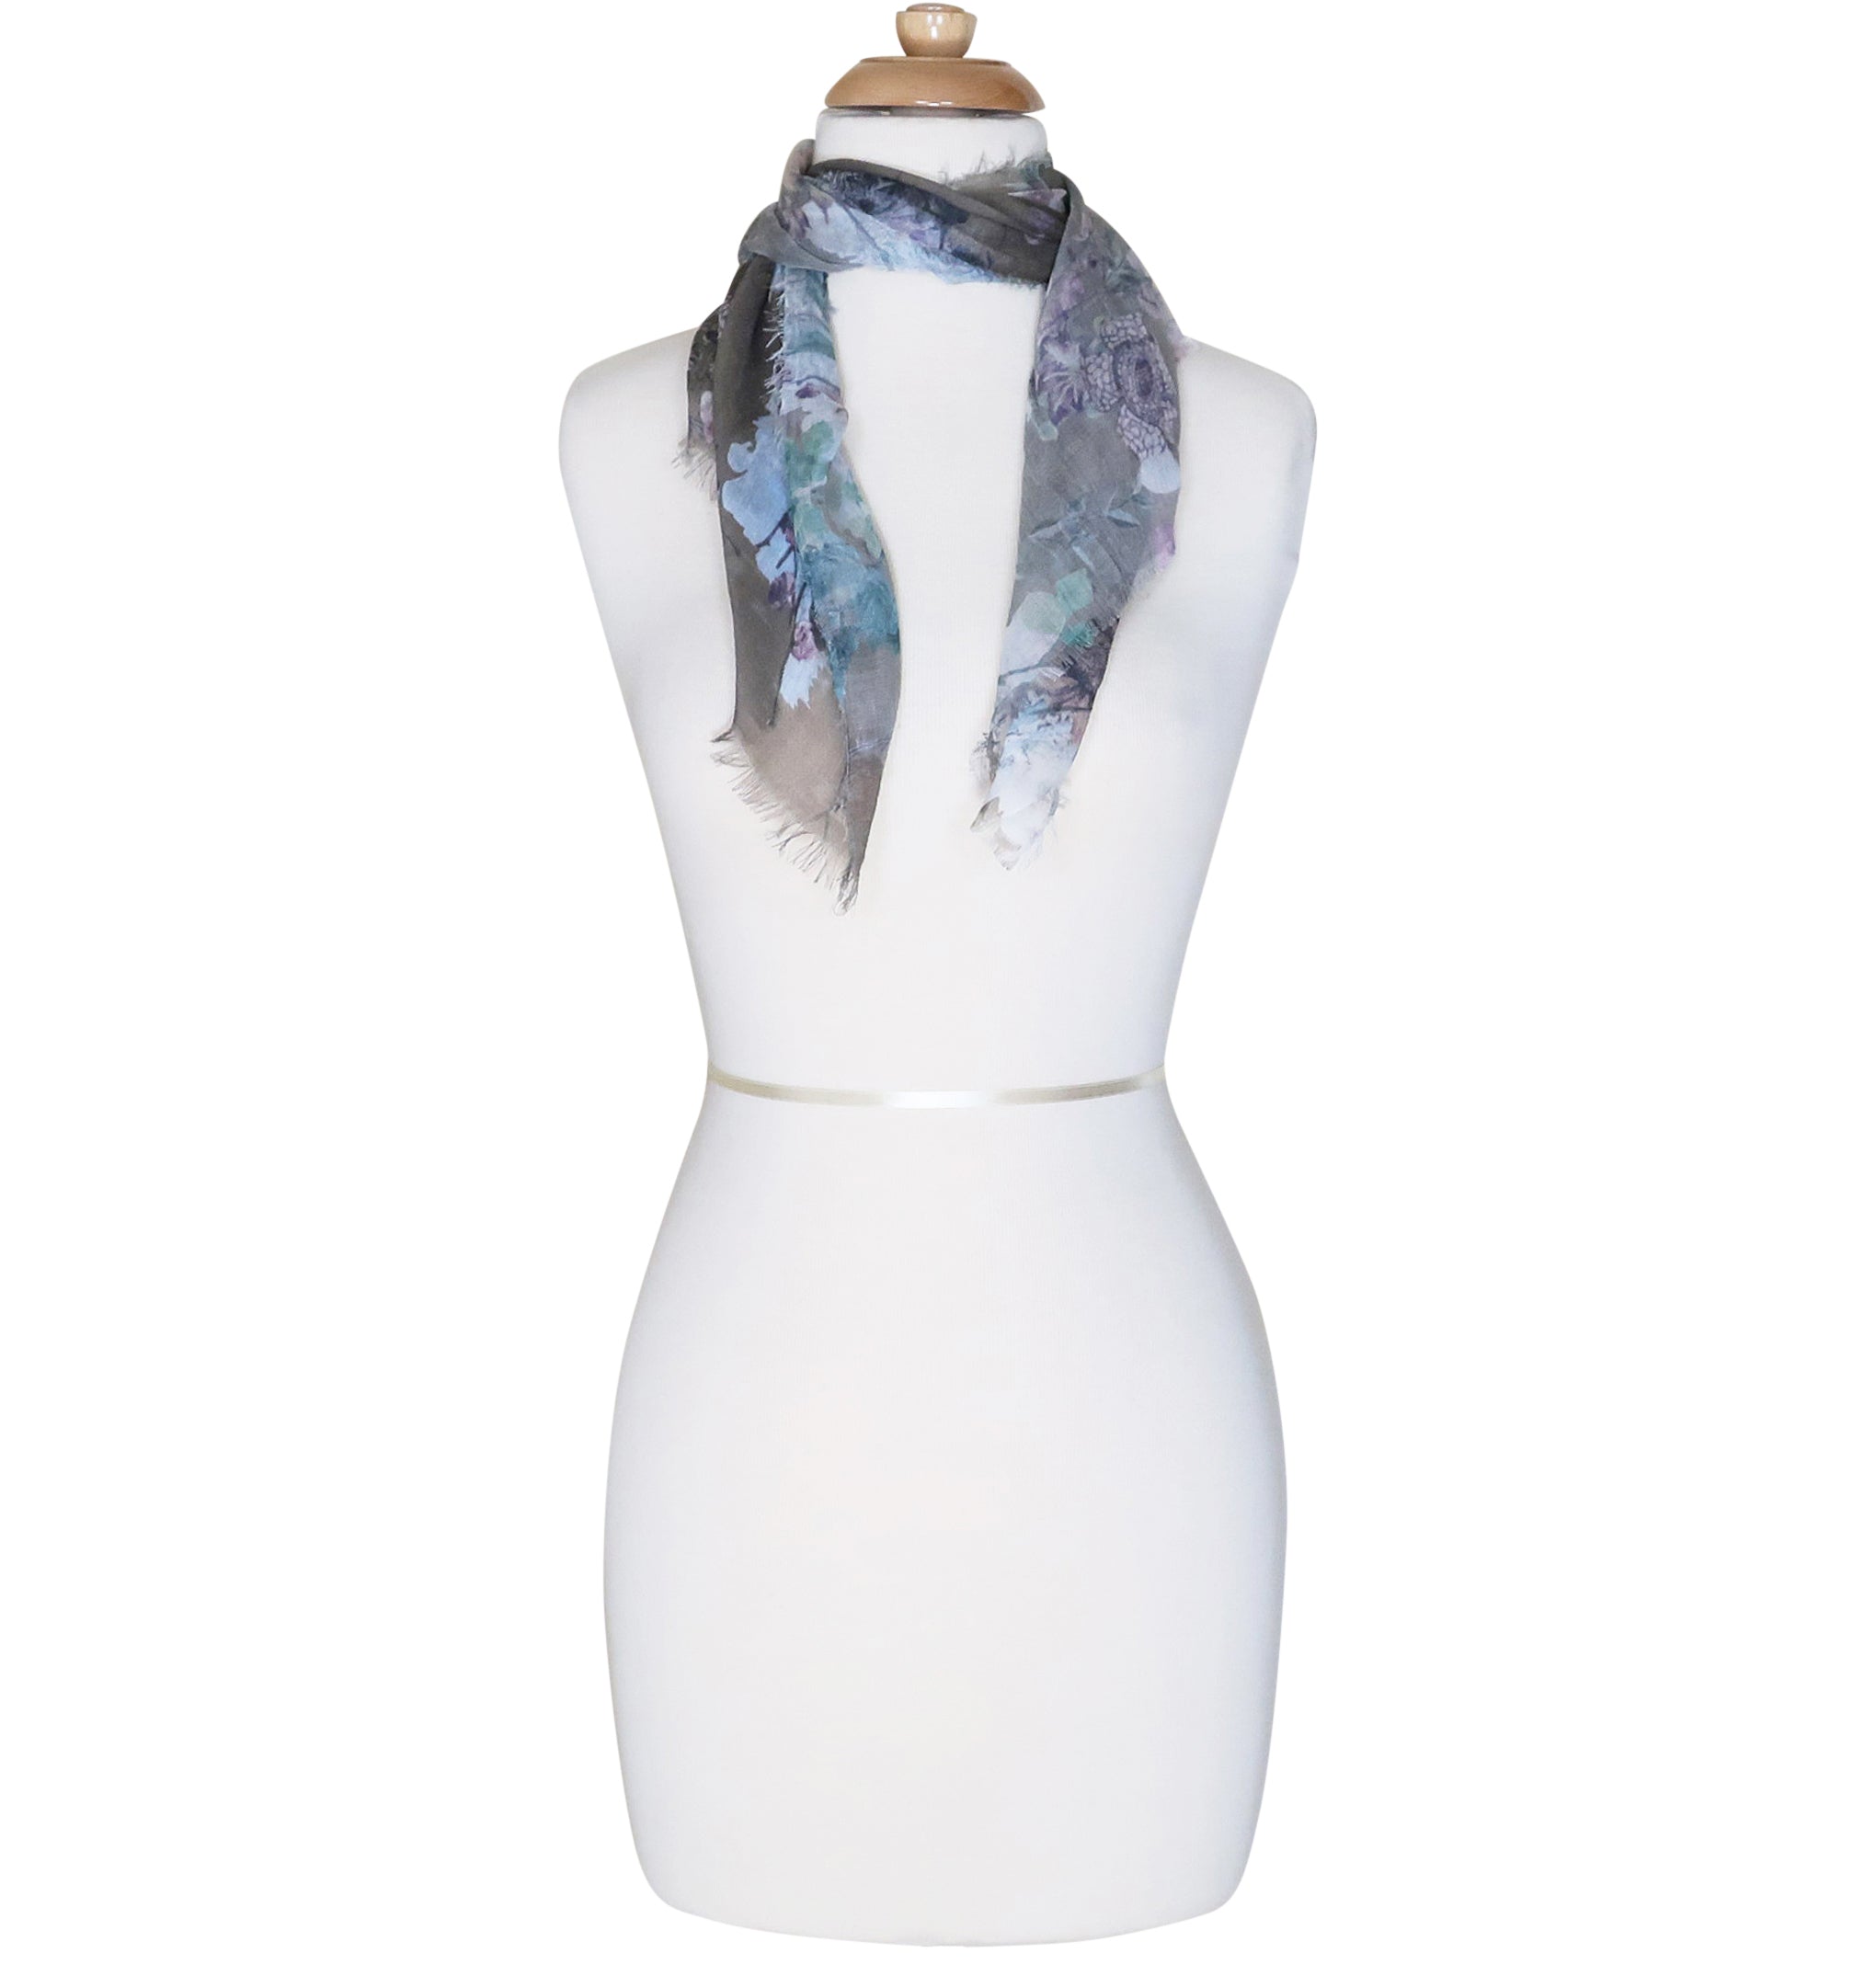 Blue Pacific Floral Micromodal and Silk Neckerchief Scarf in Taupe